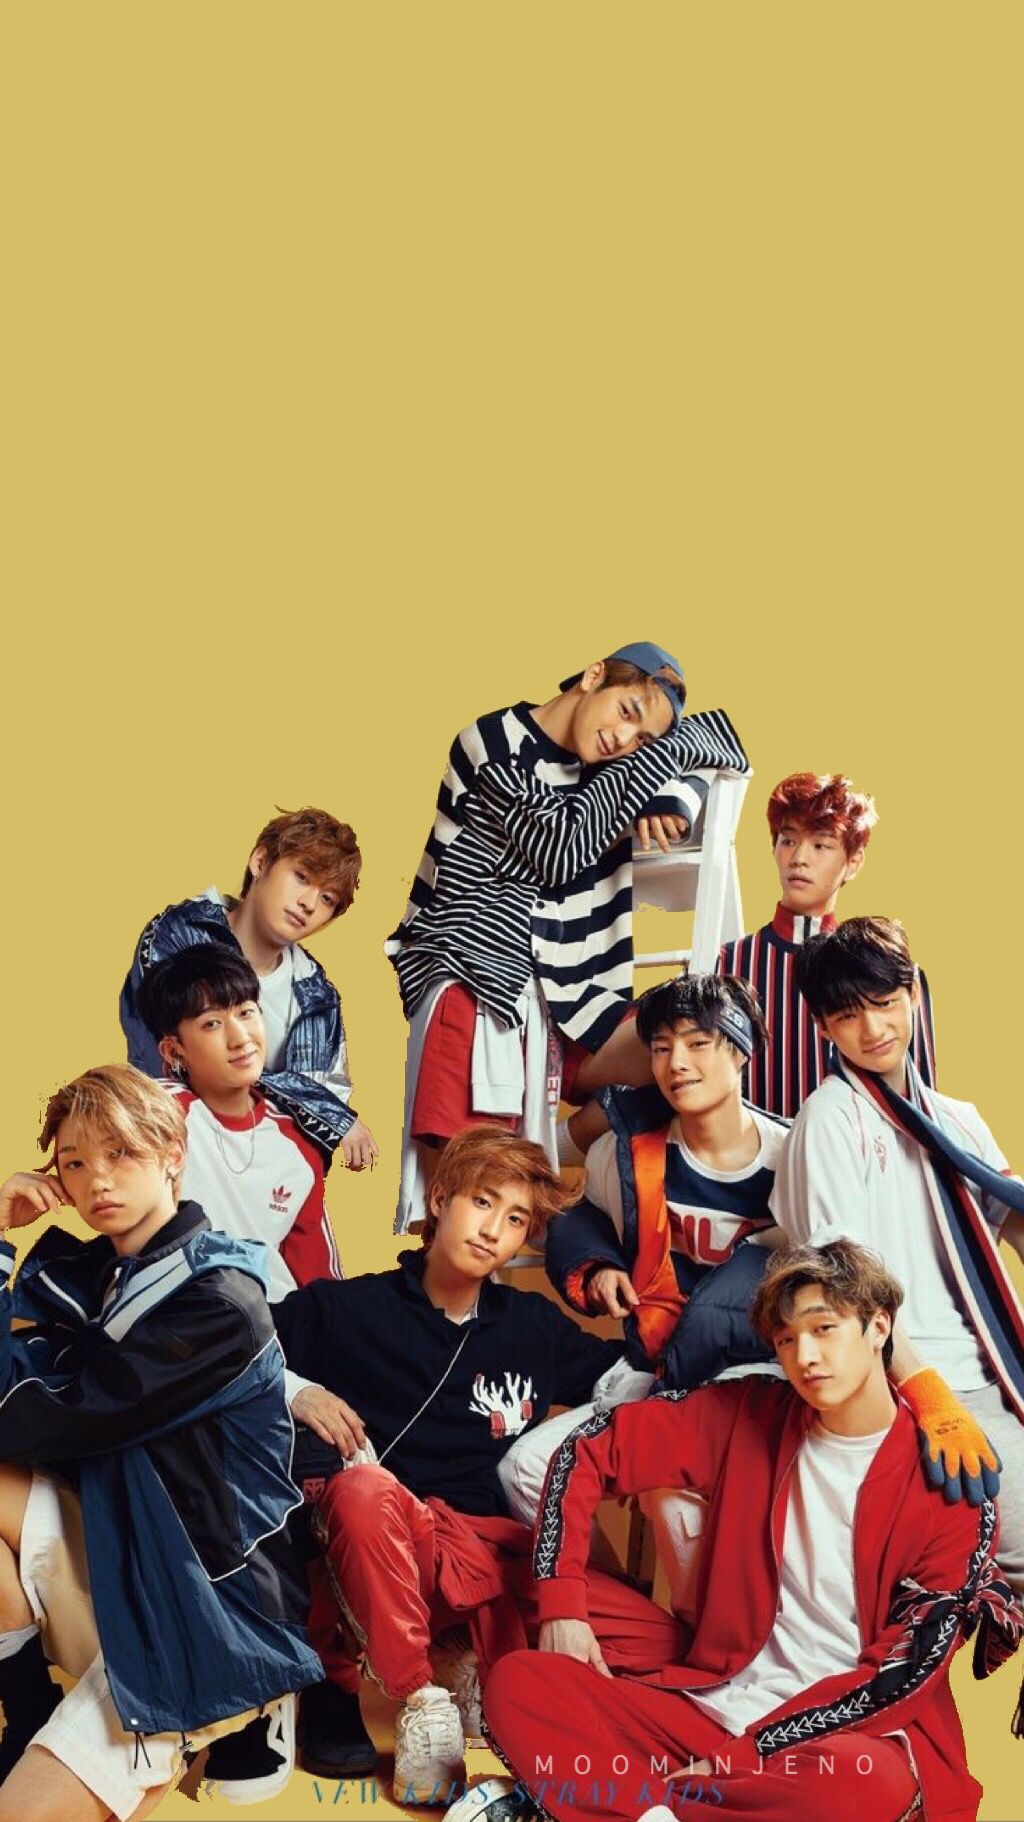 Stray Kids I.N Wallpapers